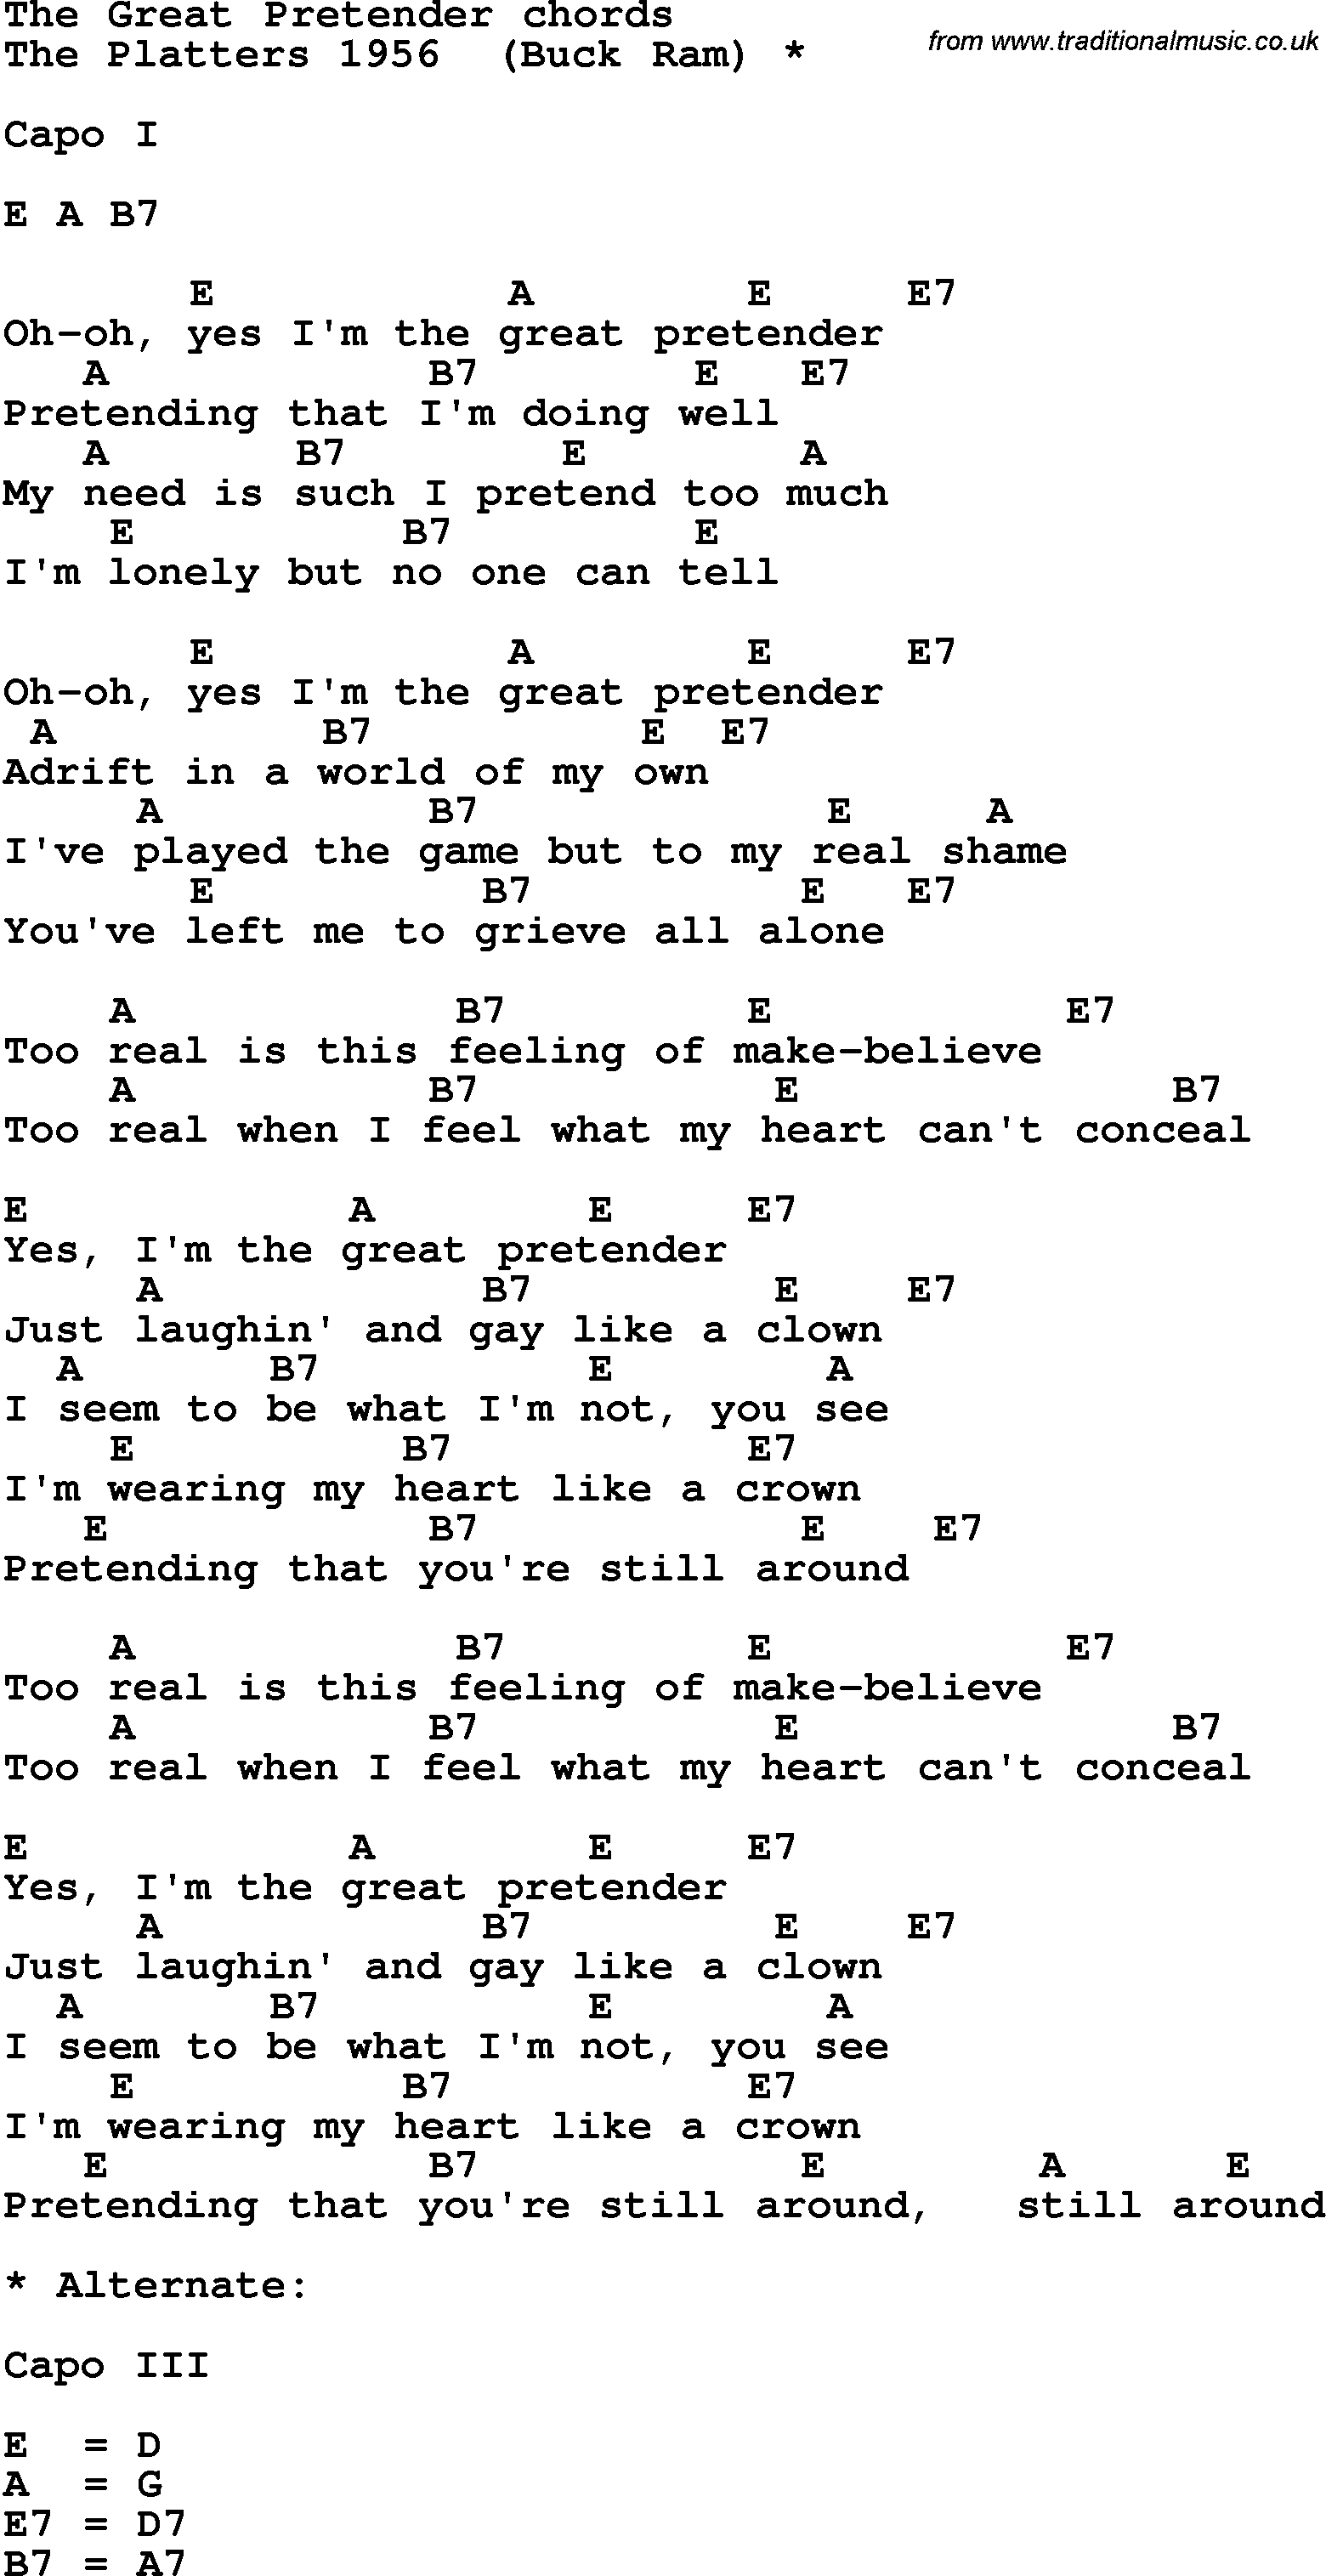 Song Lyrics with guitar chords for The Great Pretender